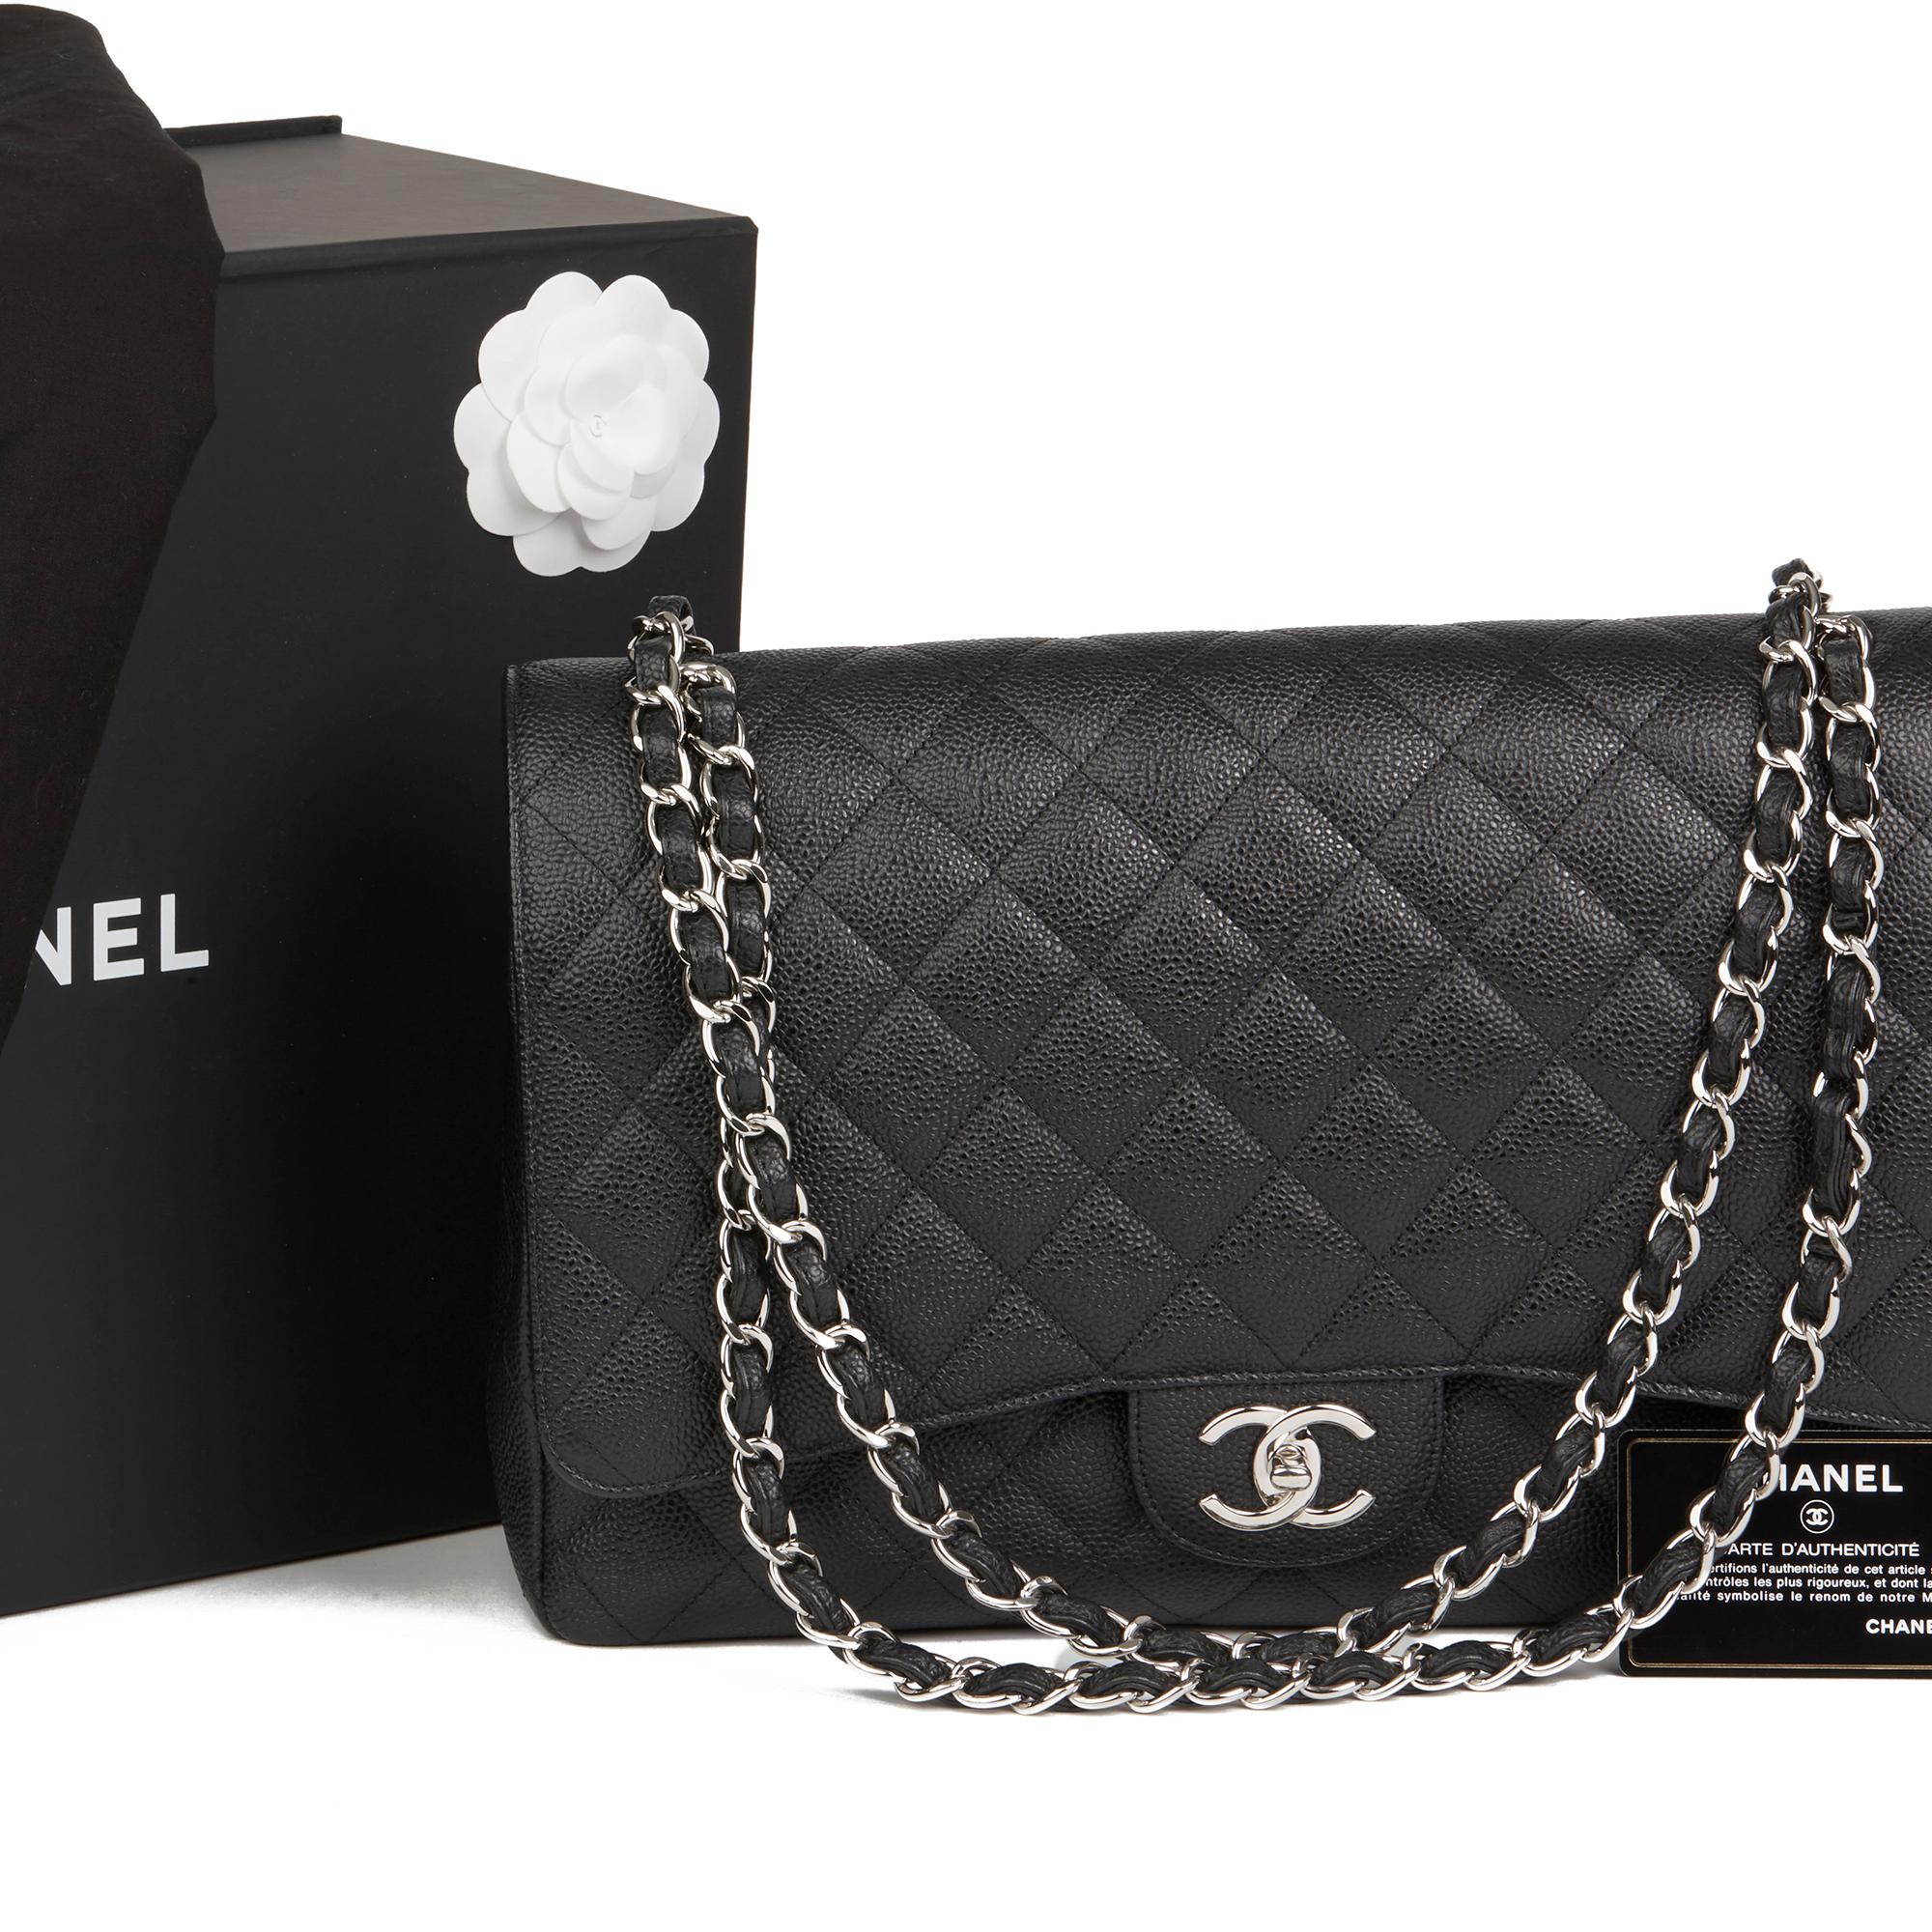 2012 Chanel Black Quilted Caviar Leather Maxi Classic Double Flap Bag 7